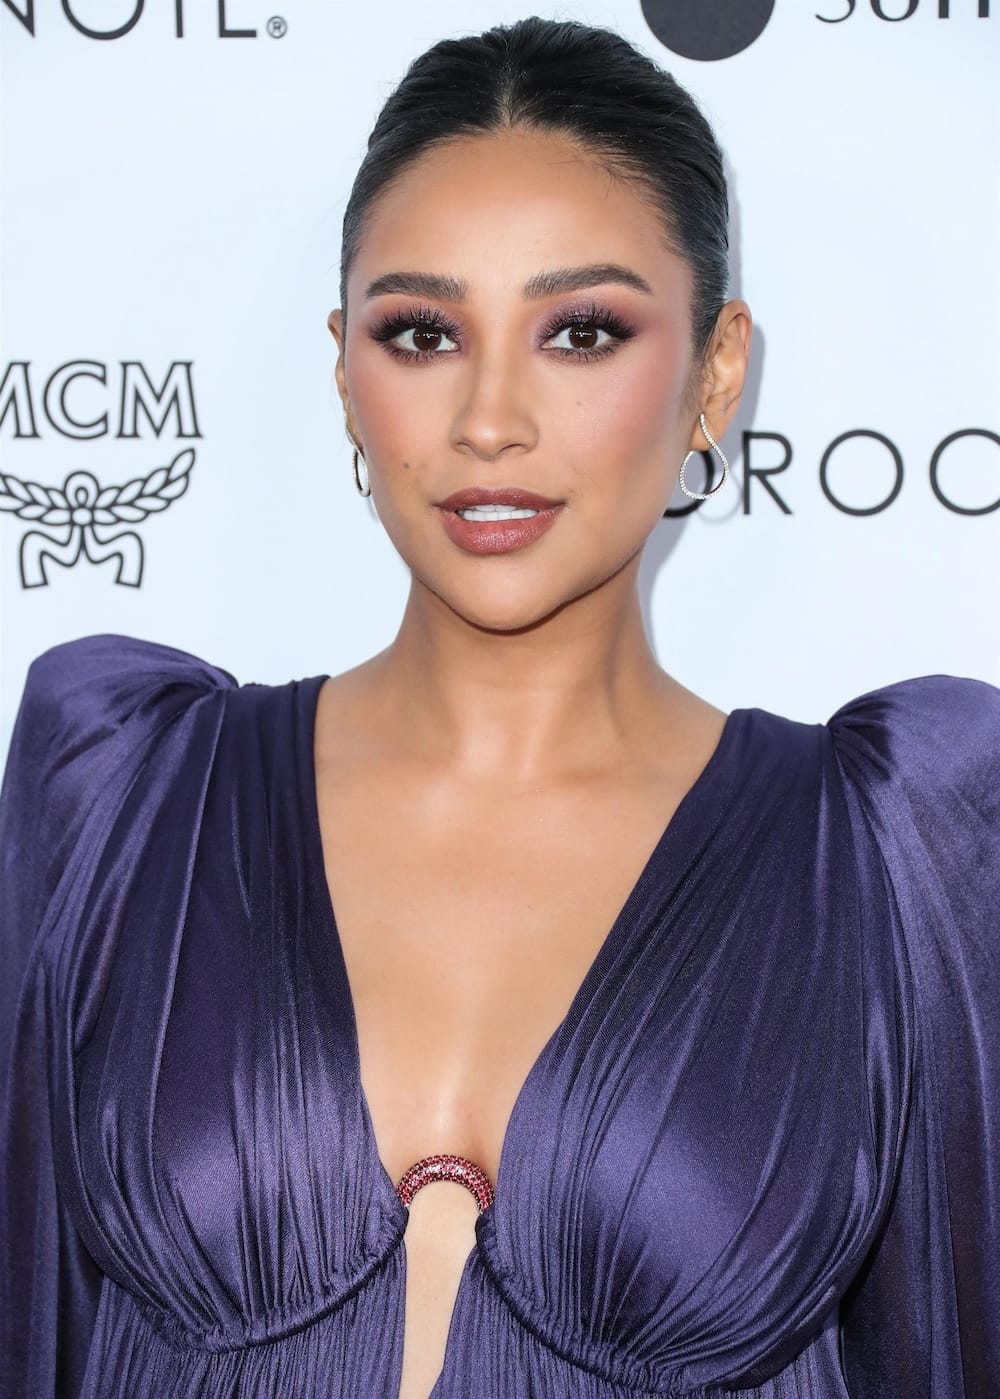 Pregnant Shay Mitchell in Lanvin Dress at 2022 Daily Front Row’s Fashion Awards